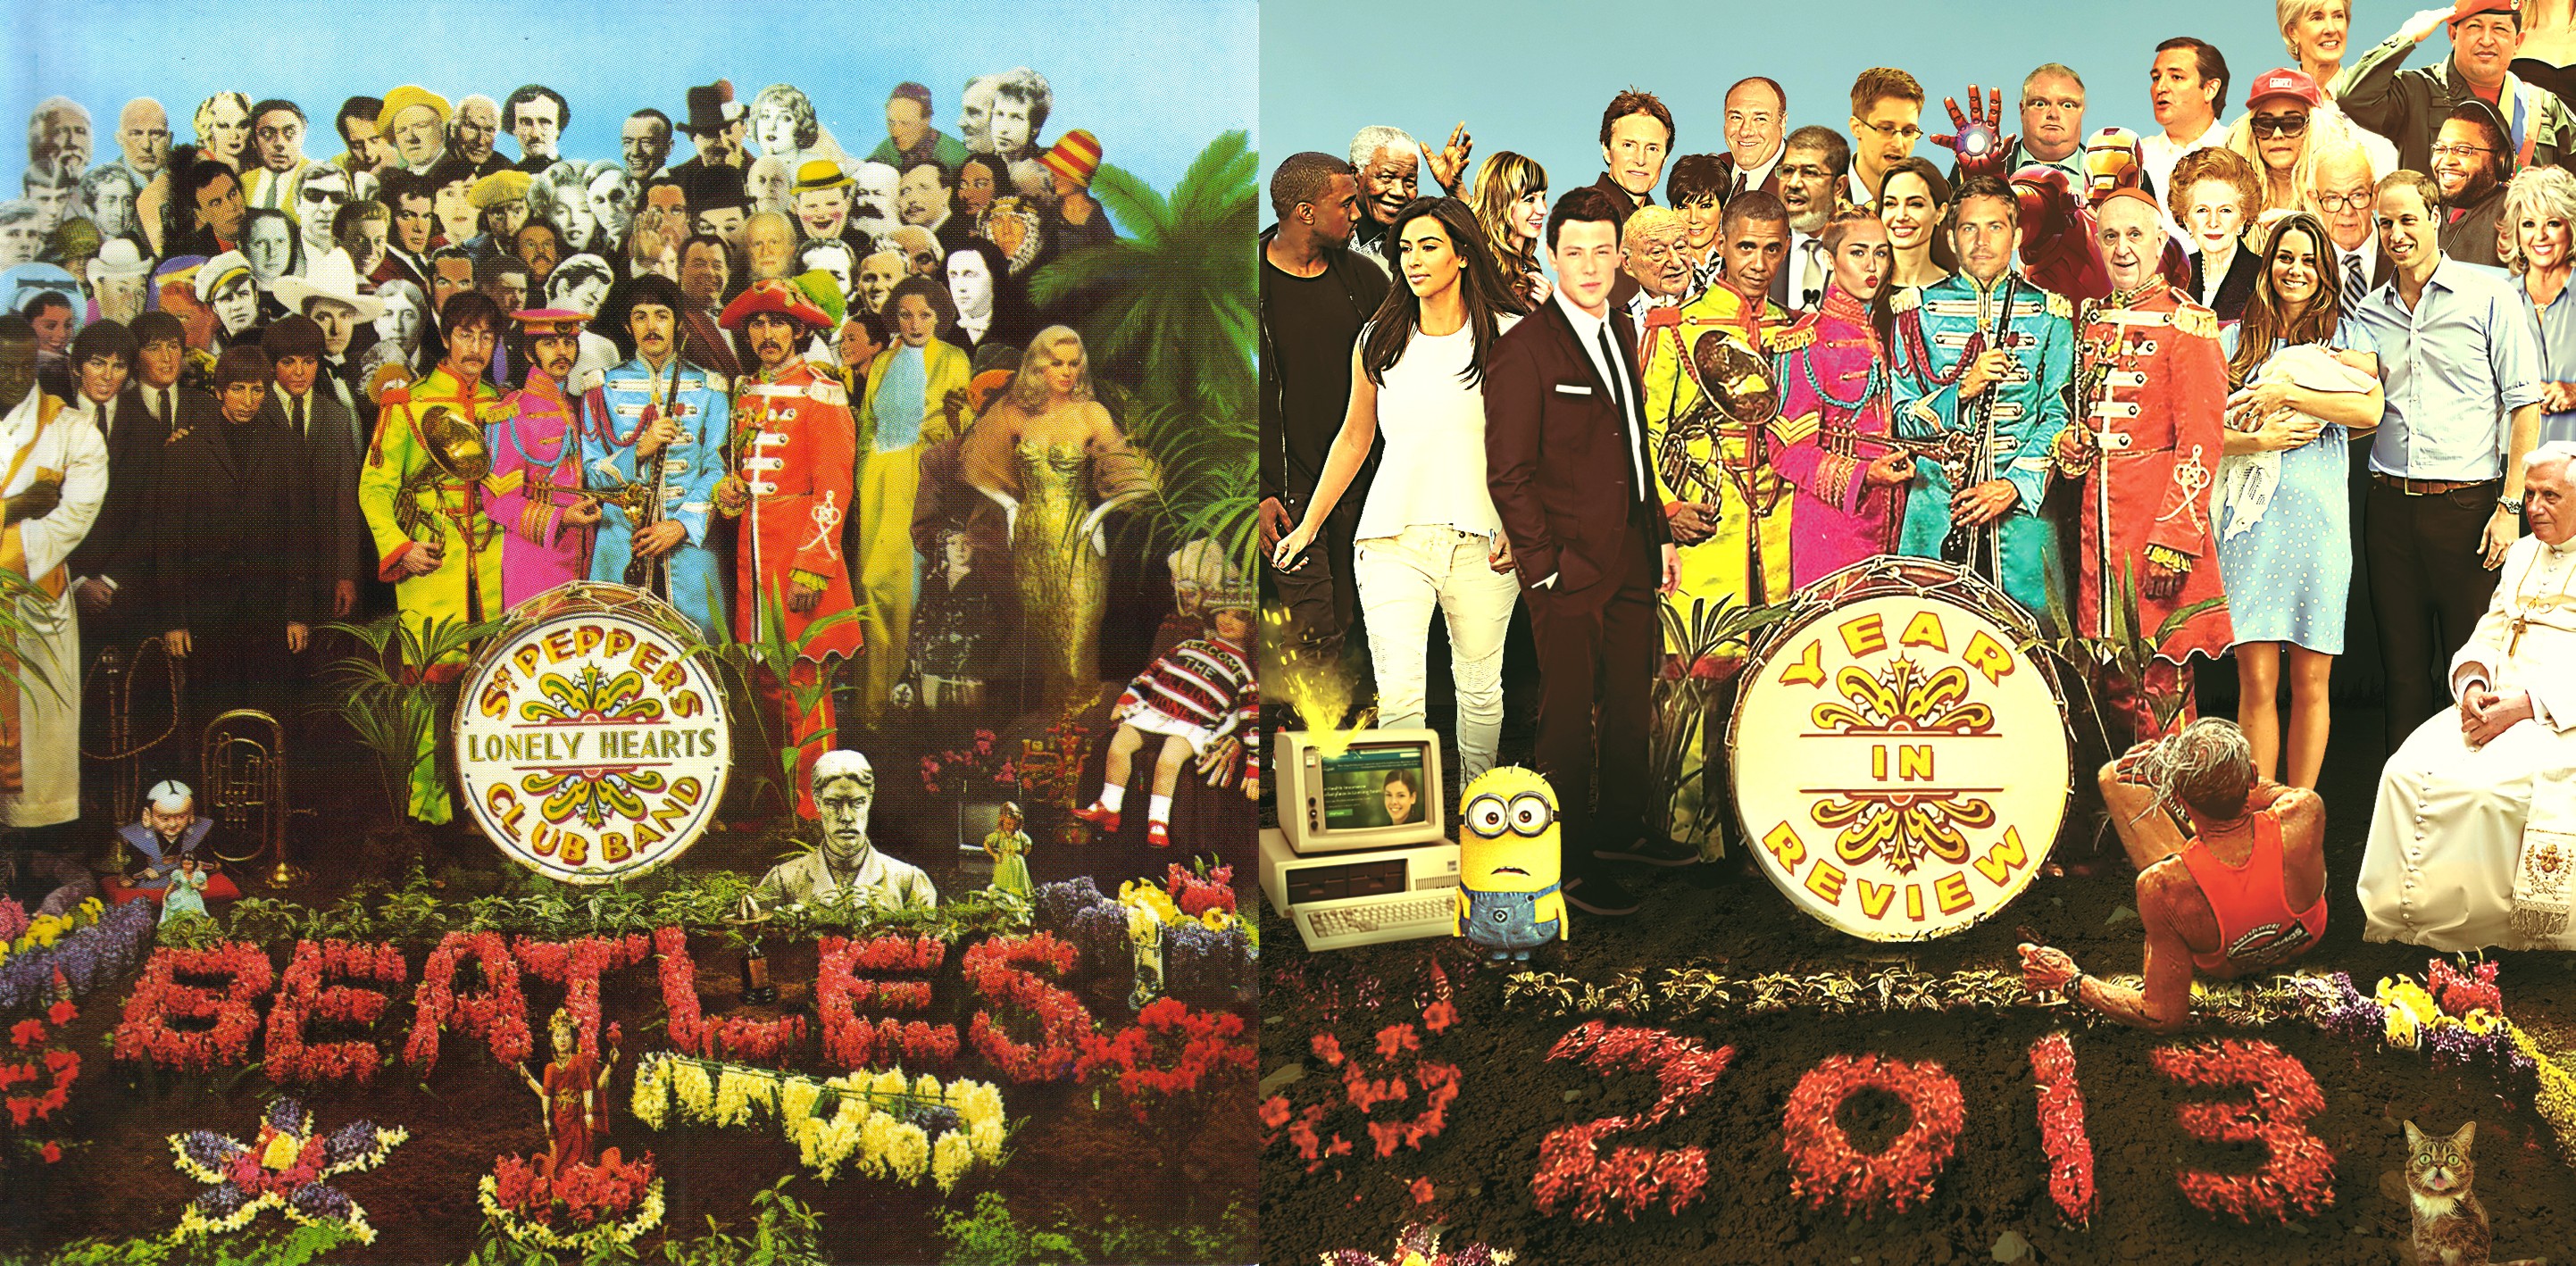 Beatles sgt peppers lonely hearts club. The Beatles сержант Пеппер. Sgt Pepper's Lonely Hearts Club Band. The Beatles Sgt. Pepper's Lonely Hearts Club Band 1967. Sgt Pepper's Lonely Hearts Club Band обложка.